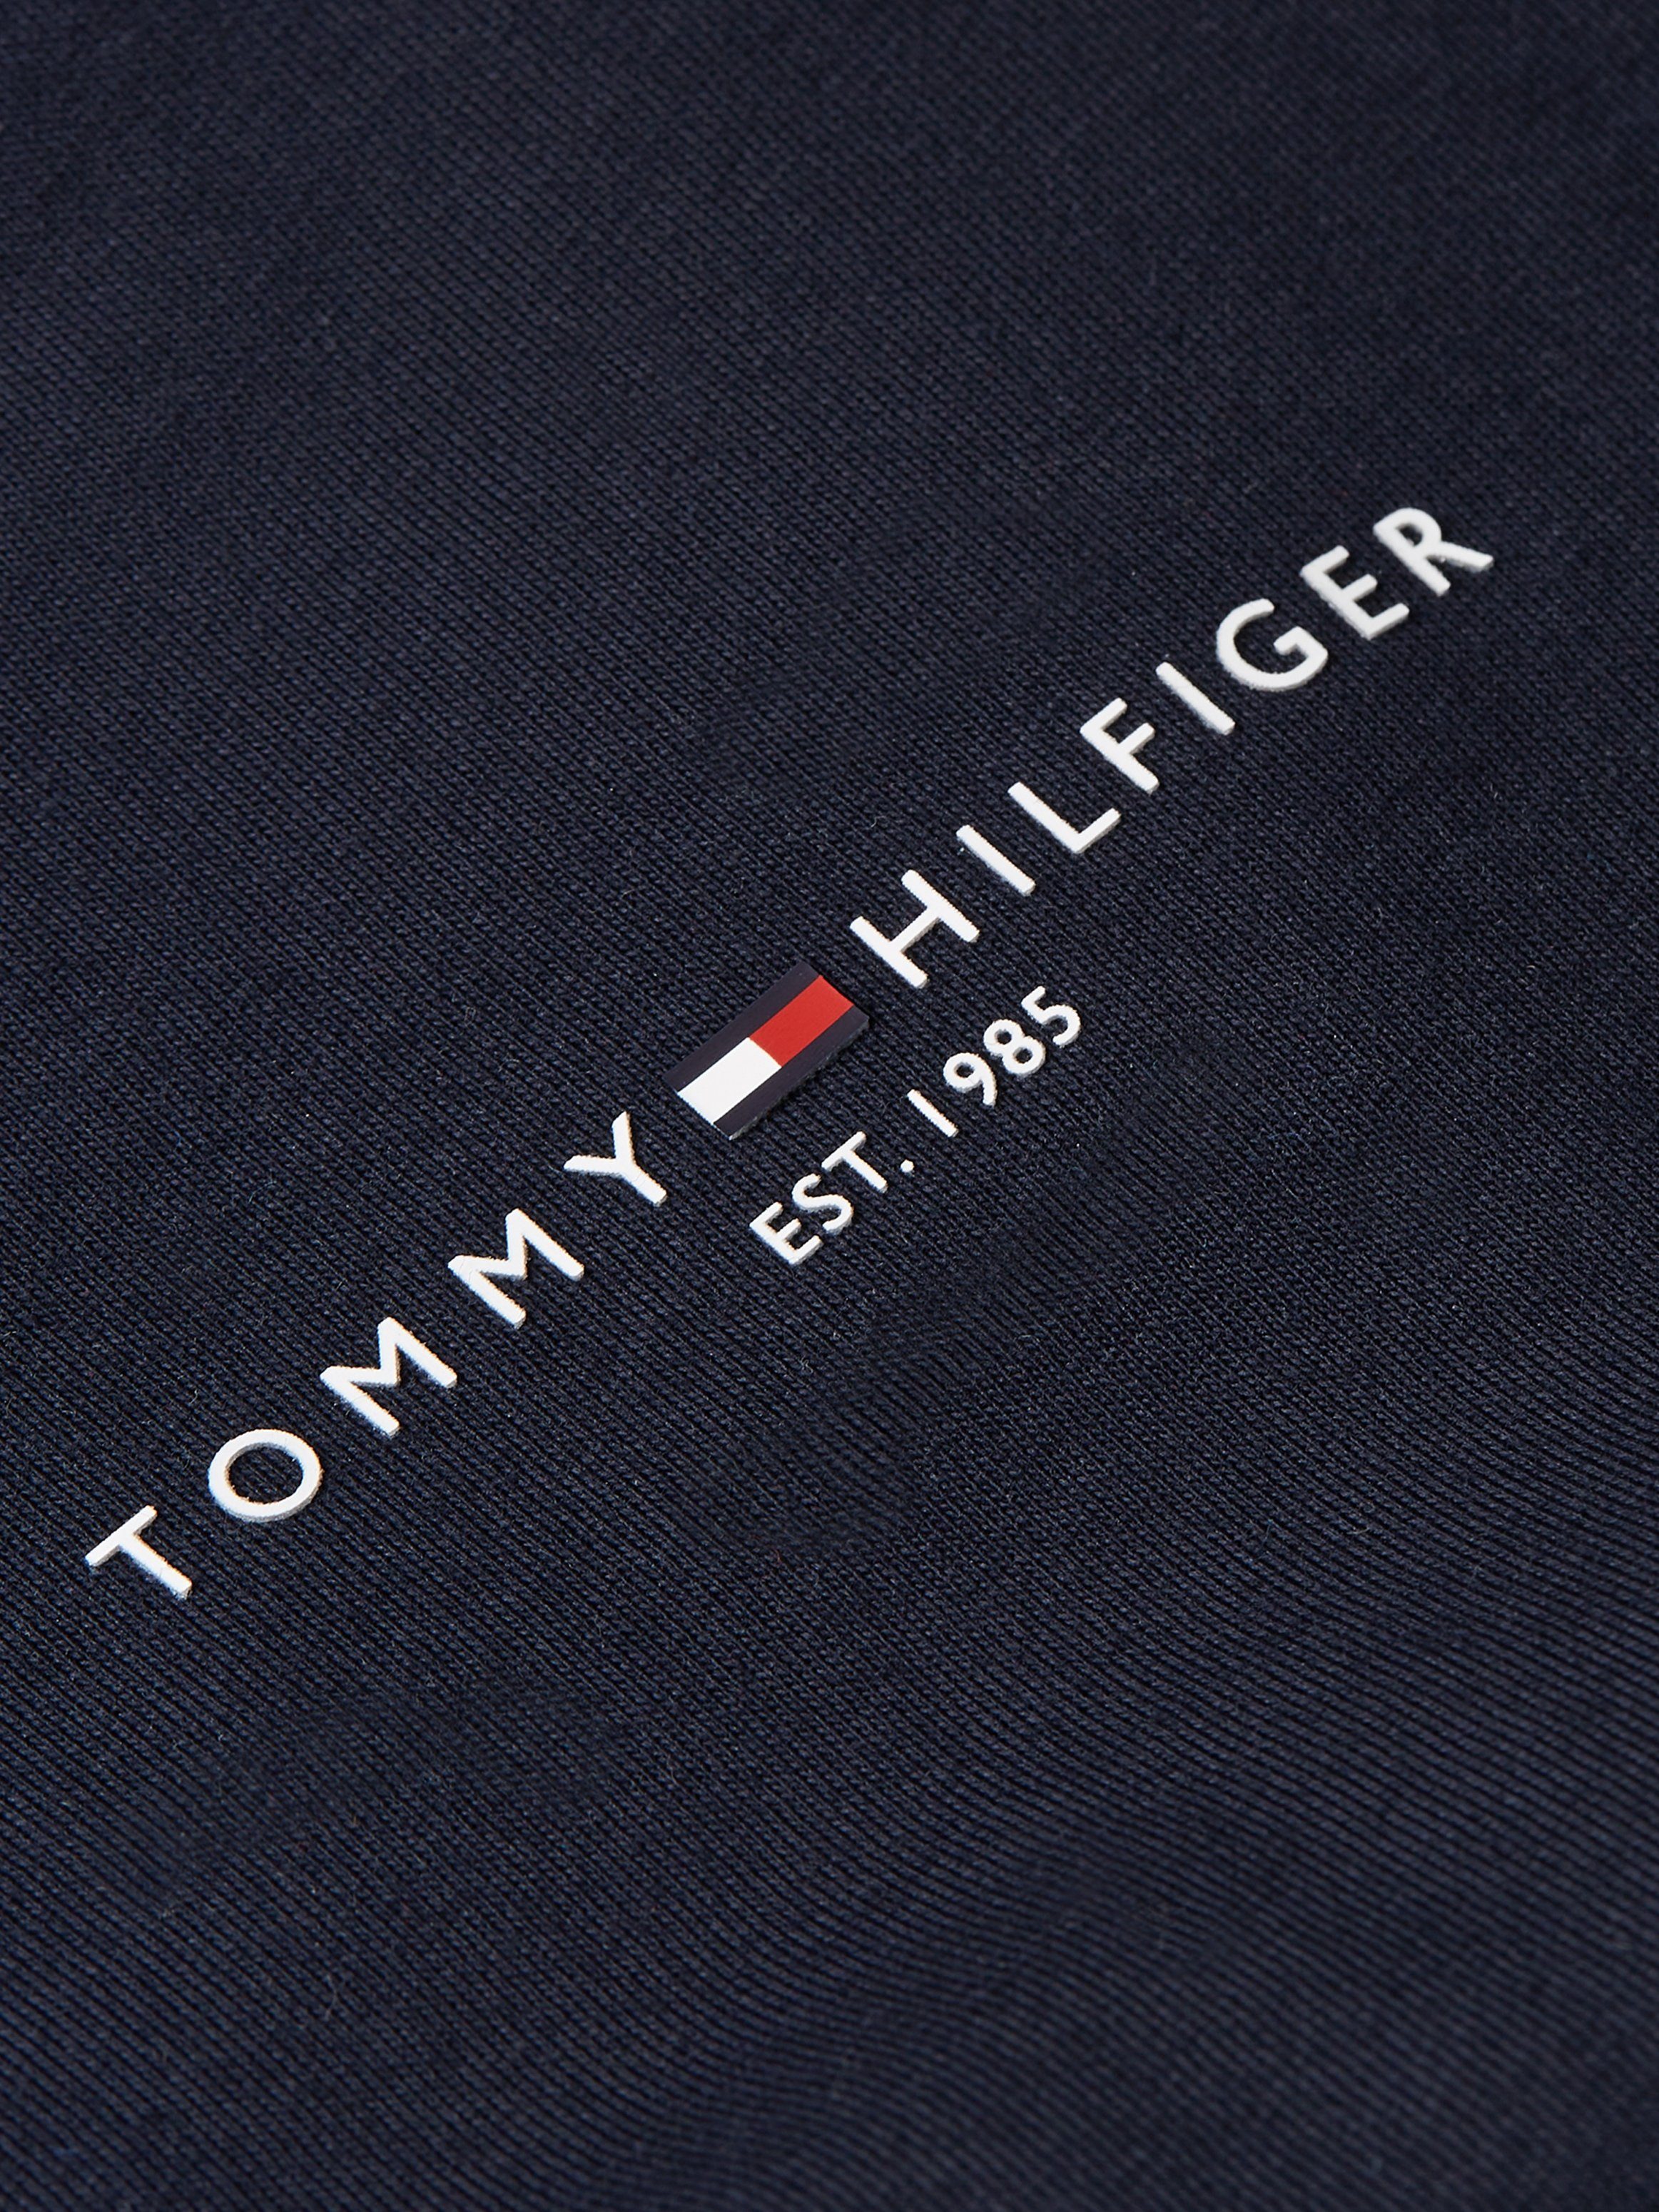 Desert LOGO TOMMY Hilfiger Tommy TEE TIPPED Sky T-Shirt